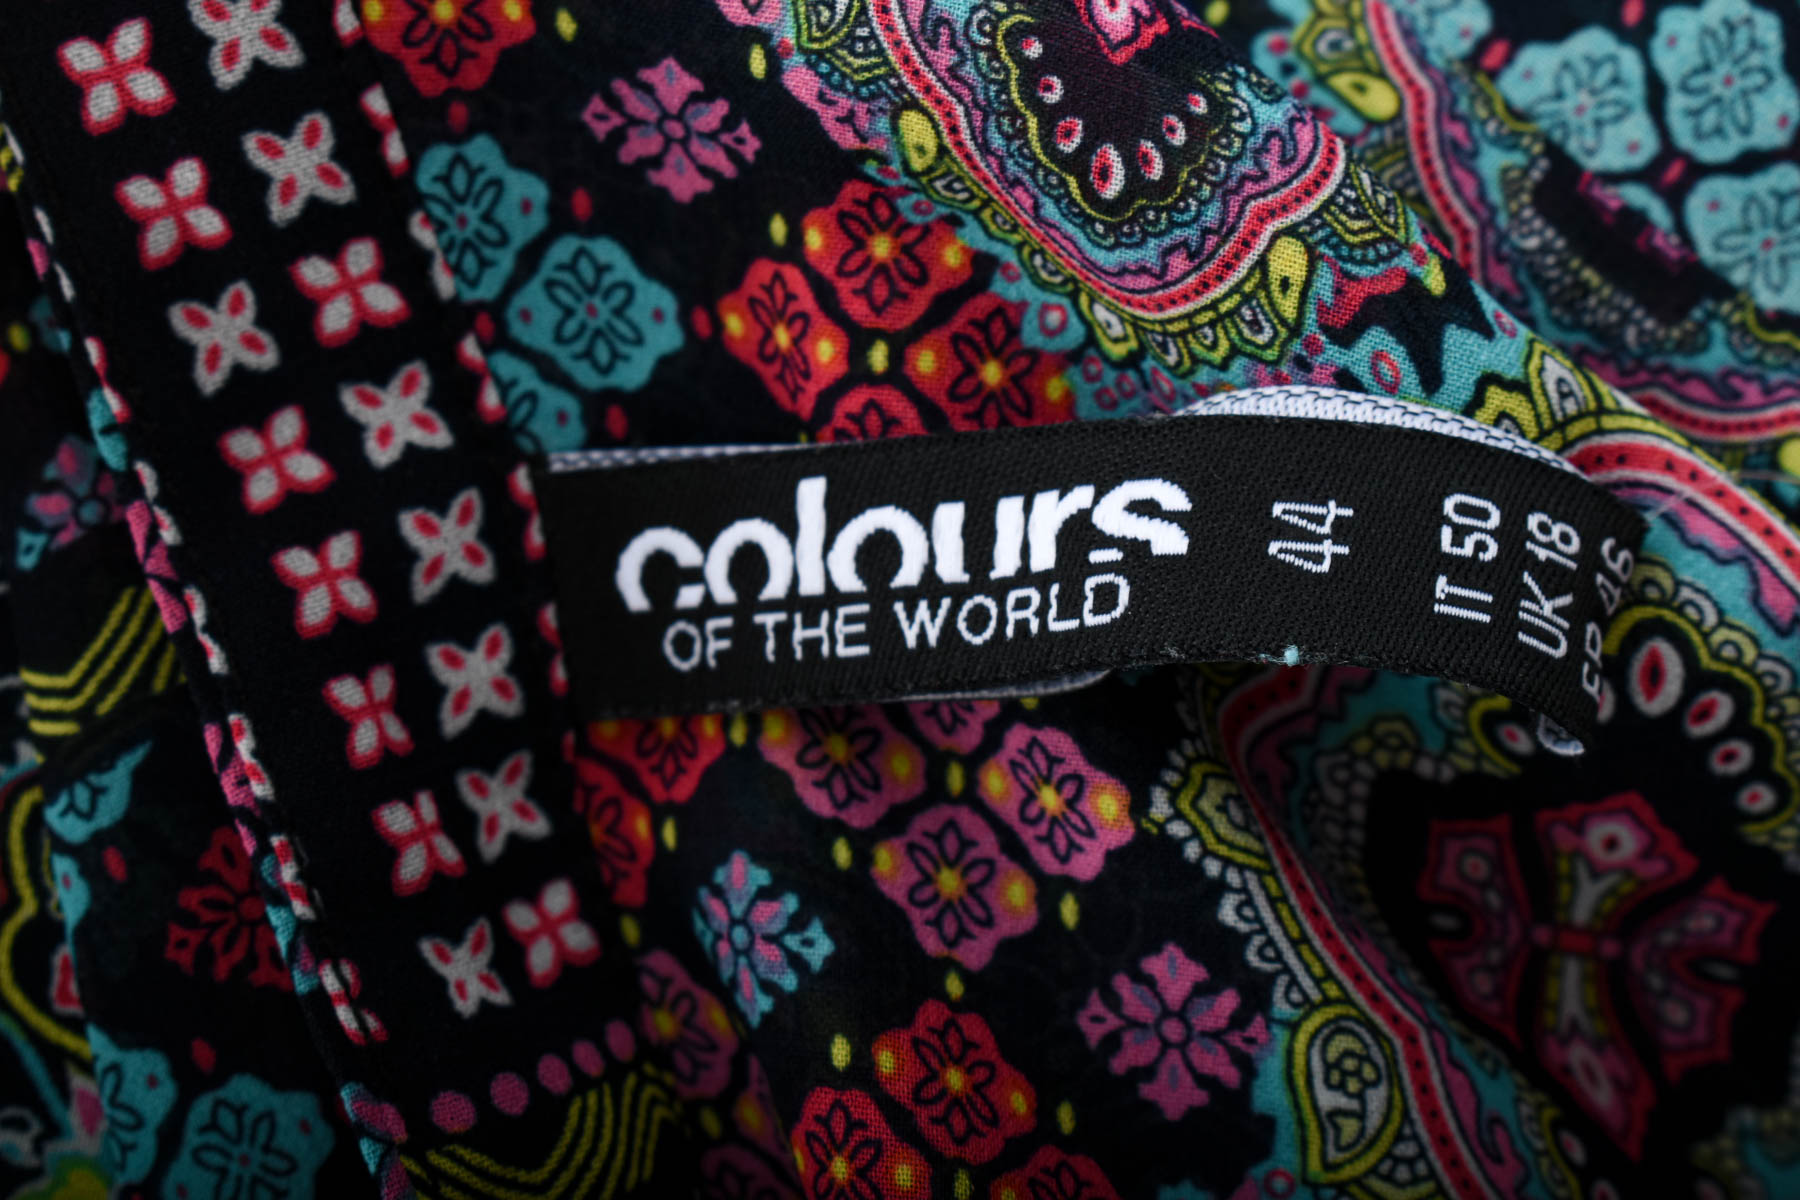 Women's shirt - Colours of the world - 2